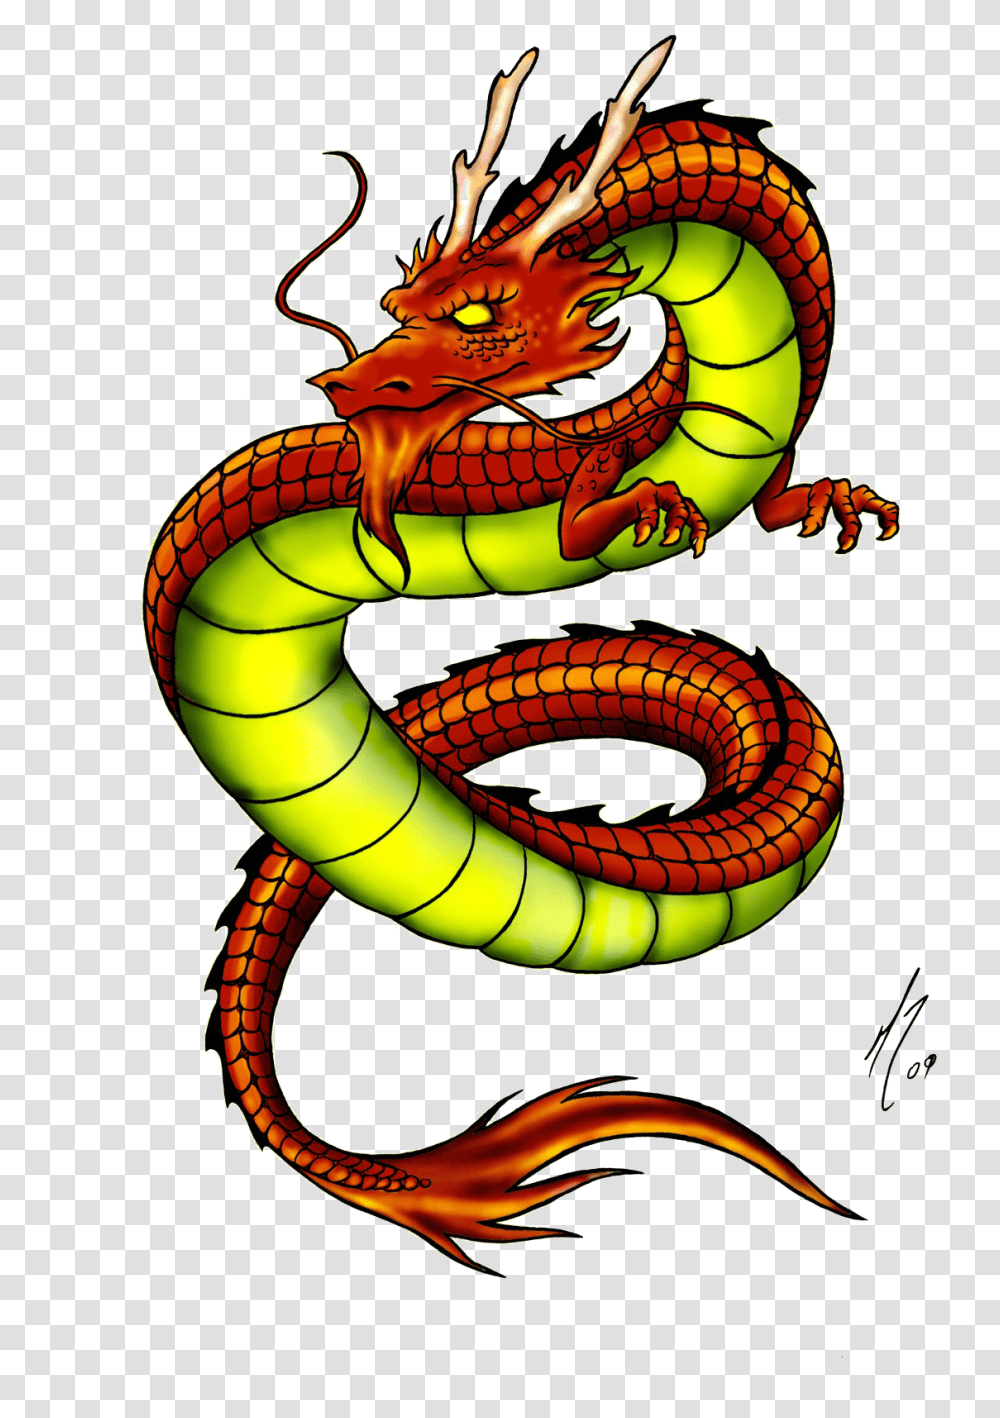 Chinese Dragon Background Play Colourful Dragon Tattoo Designs, Reptile, Animal, Snake,  Transparent Png